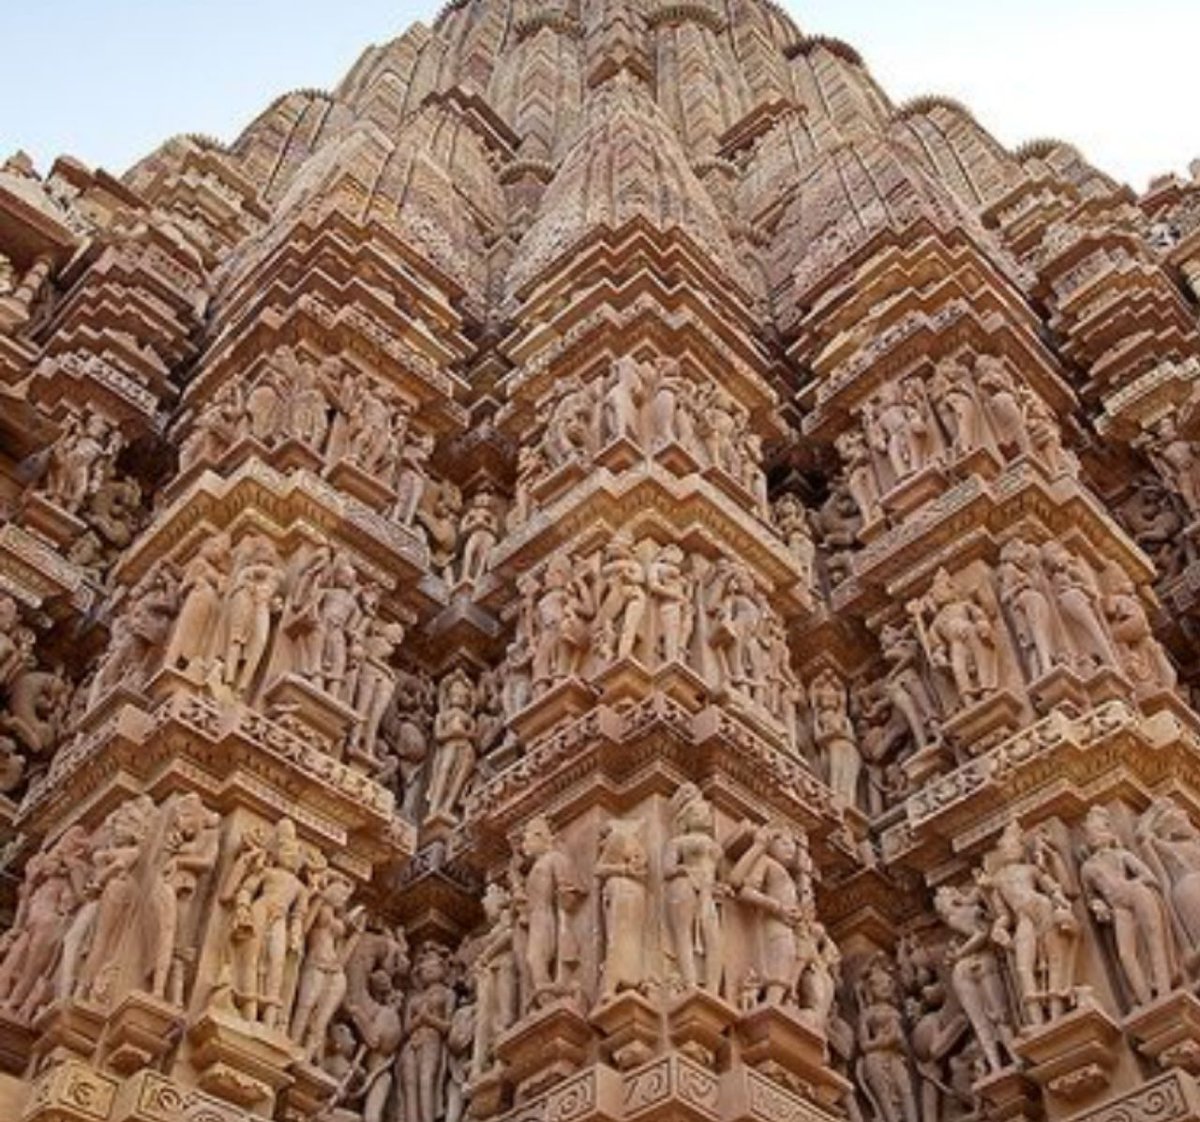 When the temple of Khajuraho was built, King Dhangadeva had surplus production. He told his Pradhan Shilpi that the wonderful and unique creation of a world, Shilpi designed the temple. When Chandel Naresh Dhangadeva saw the kaam in art painting on the temple,